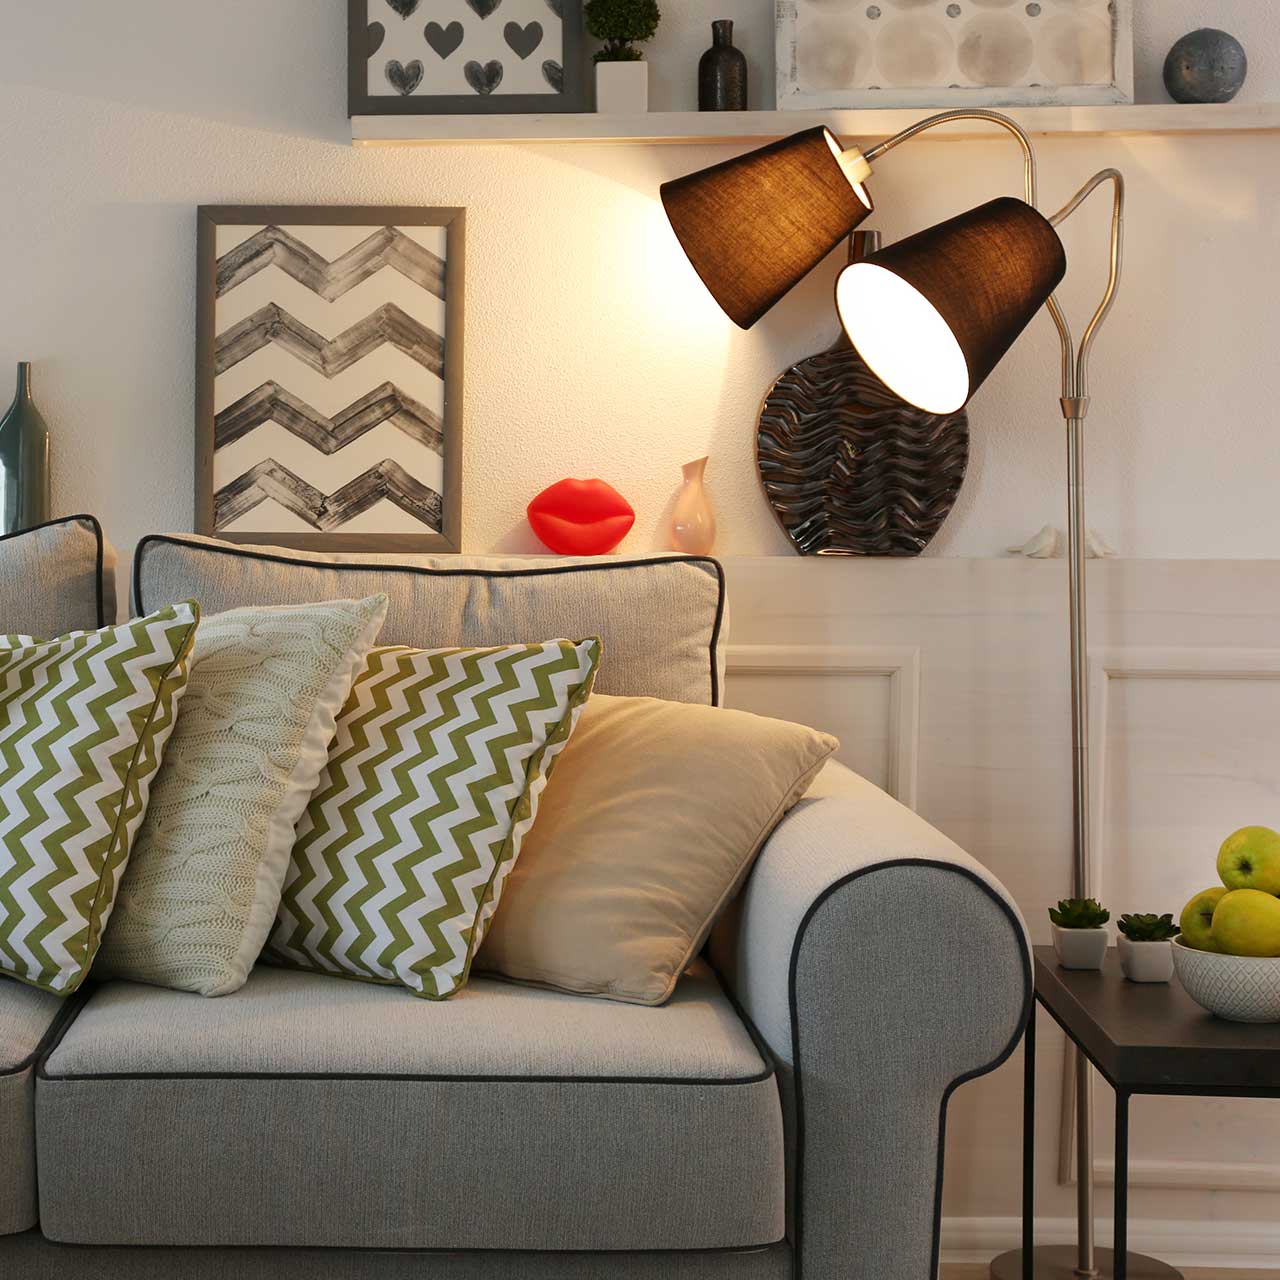 Choose floor lamps, table lamps, wall sconces are to create a cozy, warm atmosphere to living room interiors